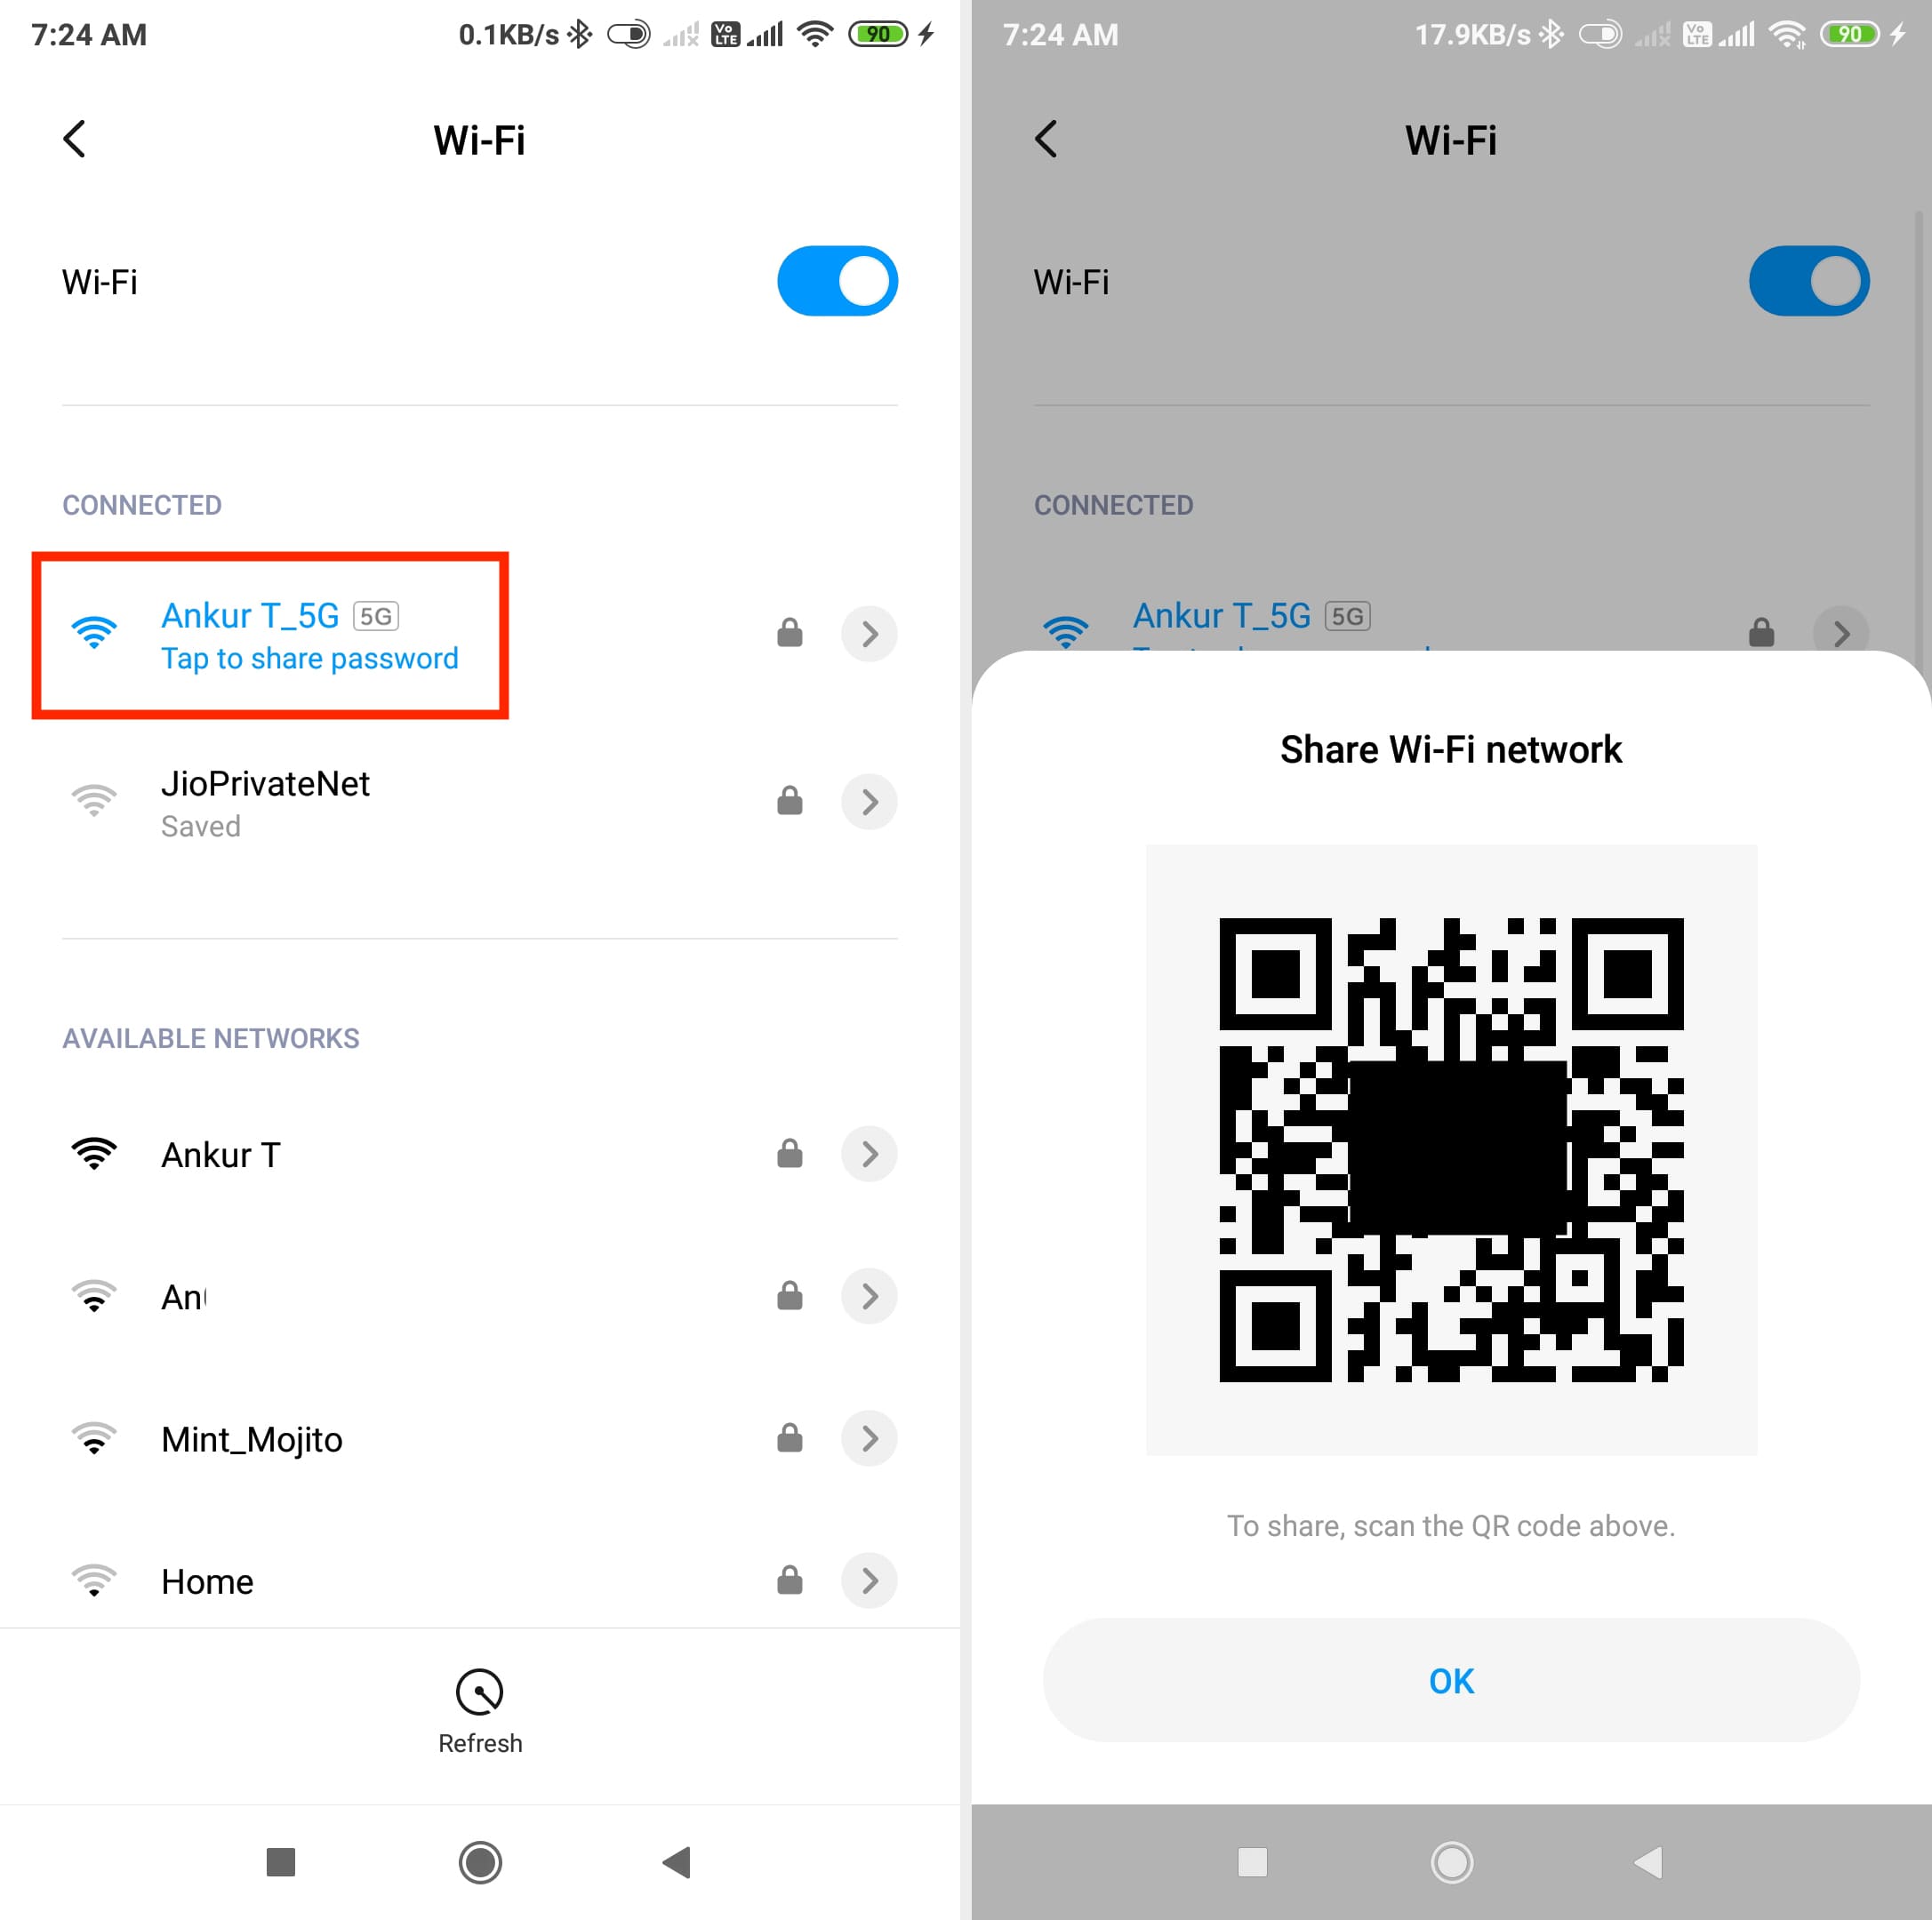 Tap to share password on Android phone in Wi-Fi settings